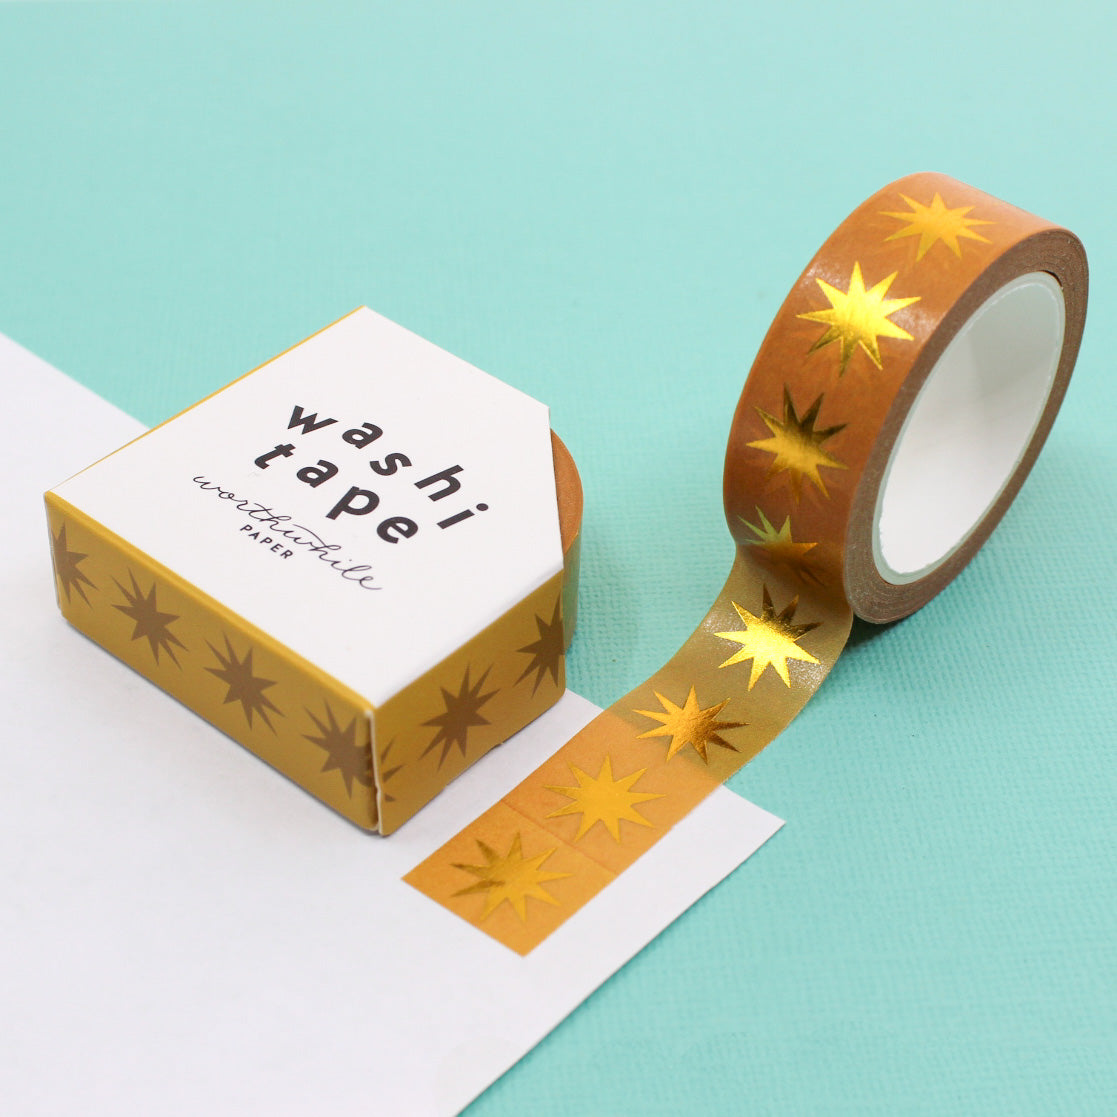 Add a touch of timeless glamour to your projects with our Retro Gold Star Washi Tape. This tape features a classic design of golden stars against a yellow Ochre backdrop. giving your creations a touch of vintage elegance. Perfect for embellishing scrapbooks, planners, or crafting personalized cards, this washi tape brings a nostalgic charm. This tape is from Worthwhile Paper and sold at BBB Supplies Craft Shop.